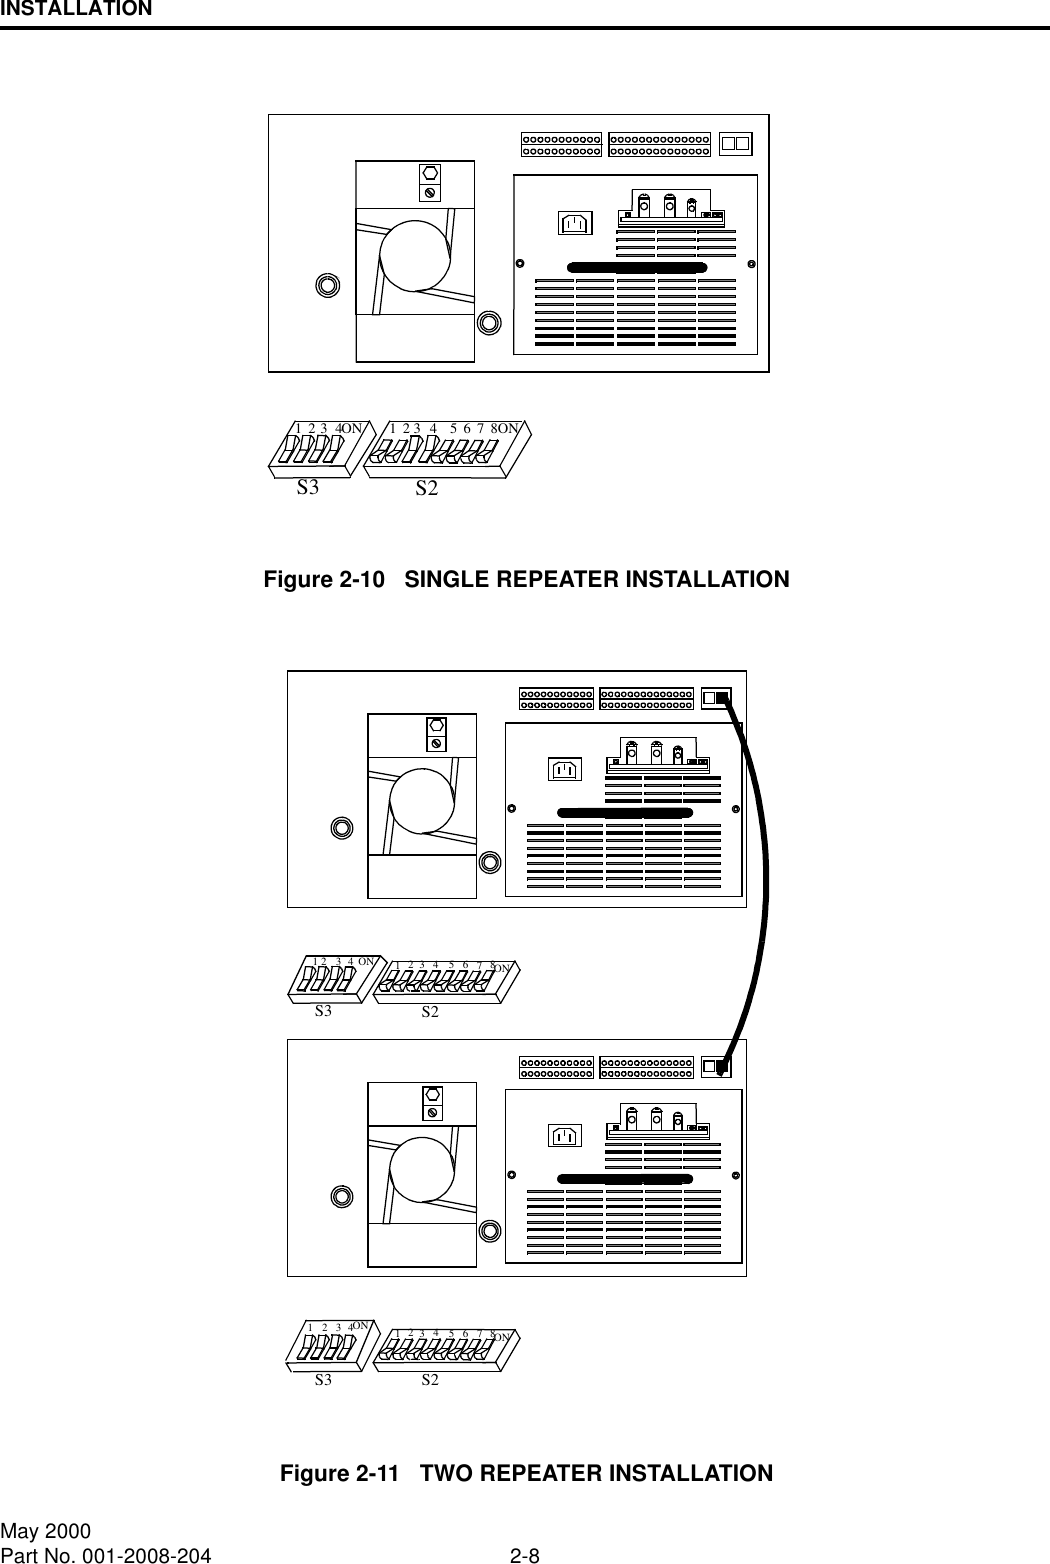 INSTALLATION2-8May 2000Part No. 001-2008-204Figure 2-10   SINGLE REPEATER INSTALLATIONFigure 2-11   TWO REPEATER INSTALLATIONON21876543ON2143S3 S2ONONS3 S2218765432143ONONS3 S2218765432143